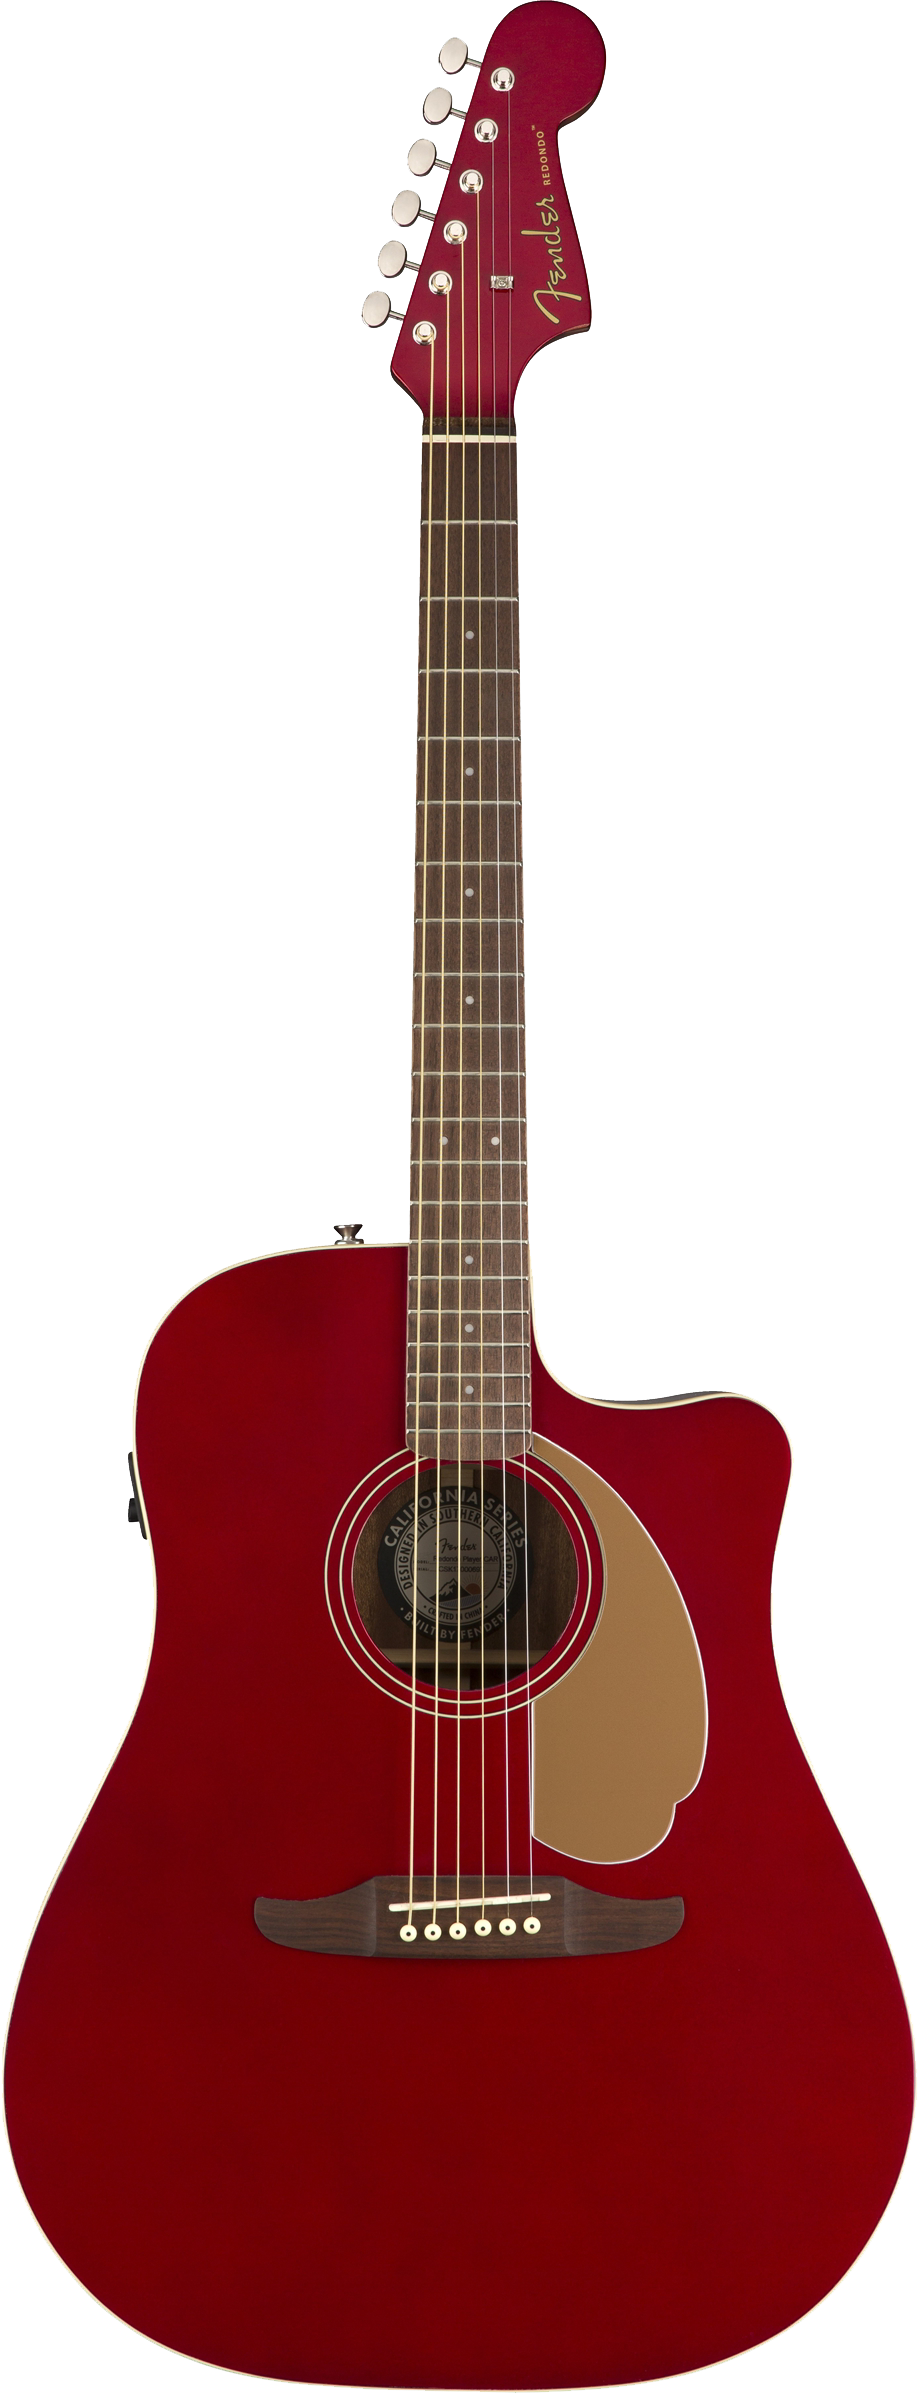 Fender Redondo Player Acoustic / Electric Guitar - Candy Apple Red